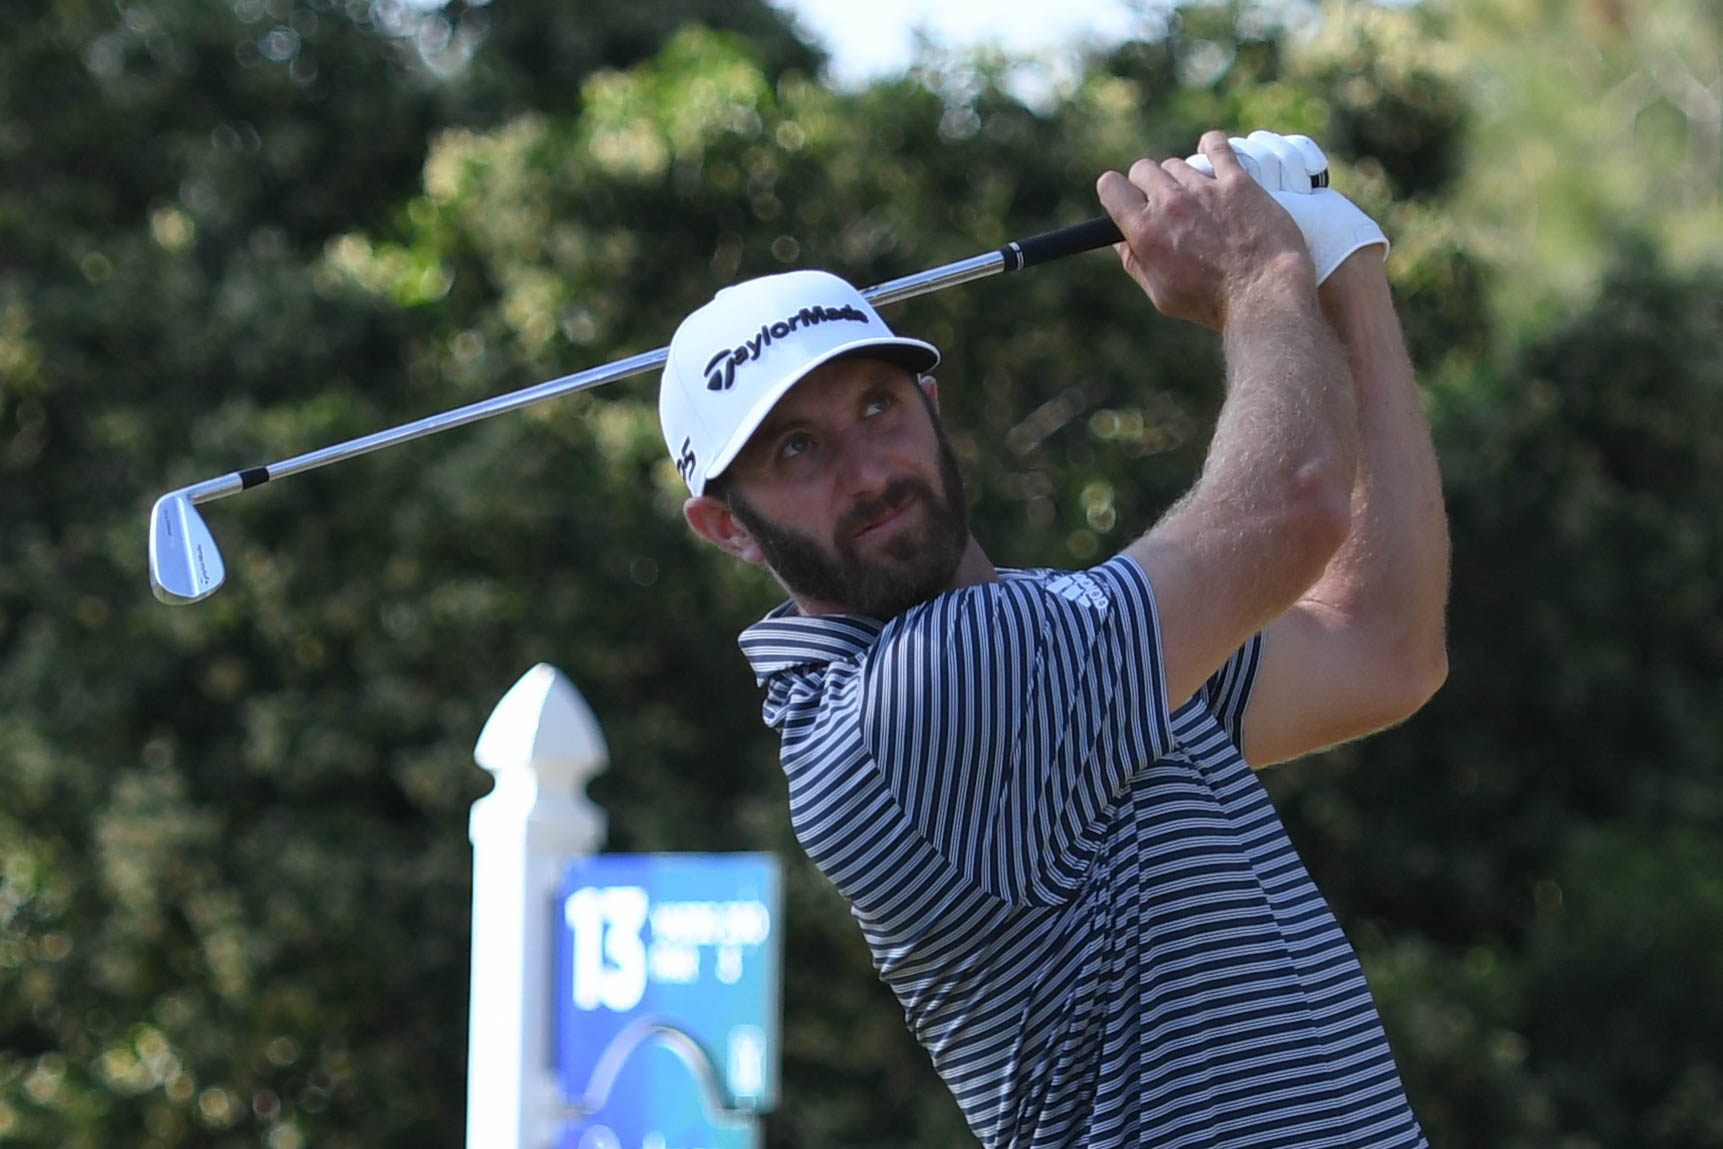 Have A Look At Former PGA Tour Fame Dustin Johnson's Net Worth